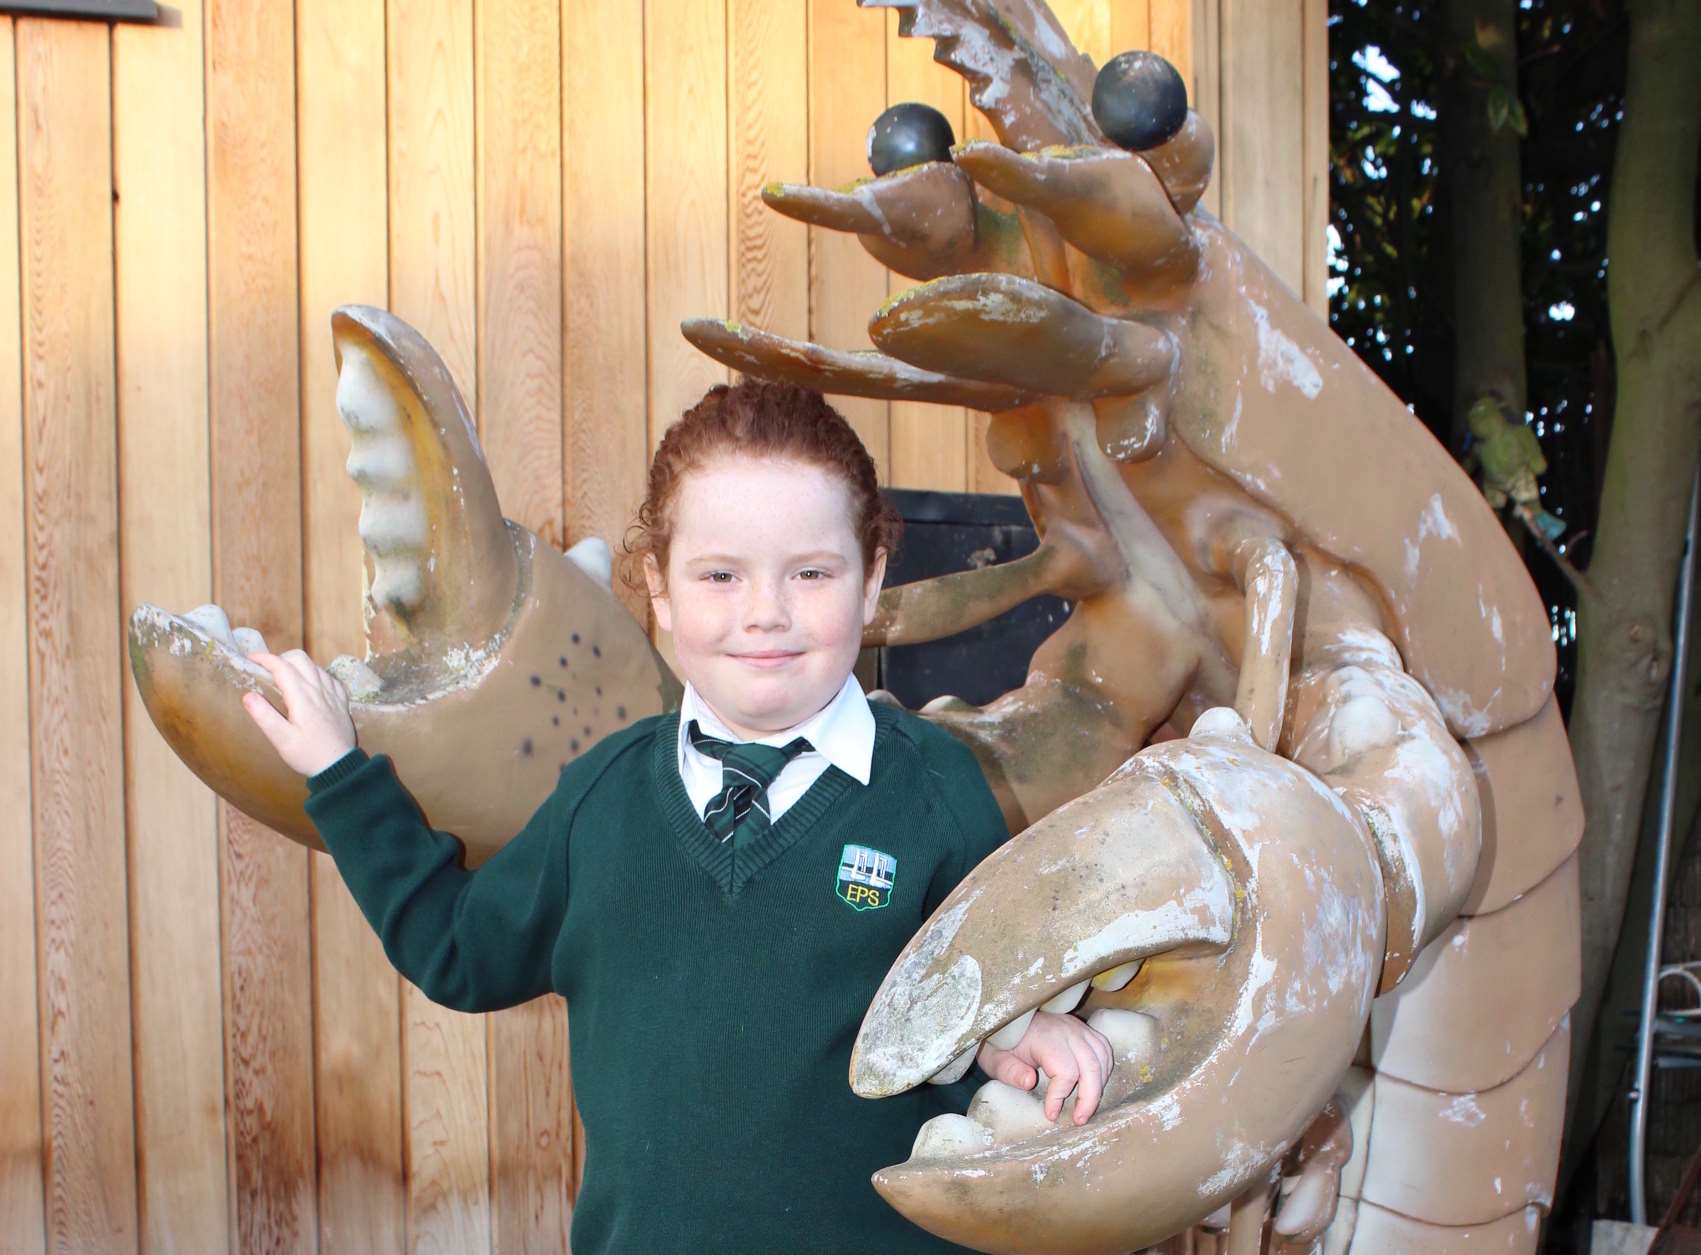 Seven-year-old Theo Chandler comes face-to-face with the giant lobster